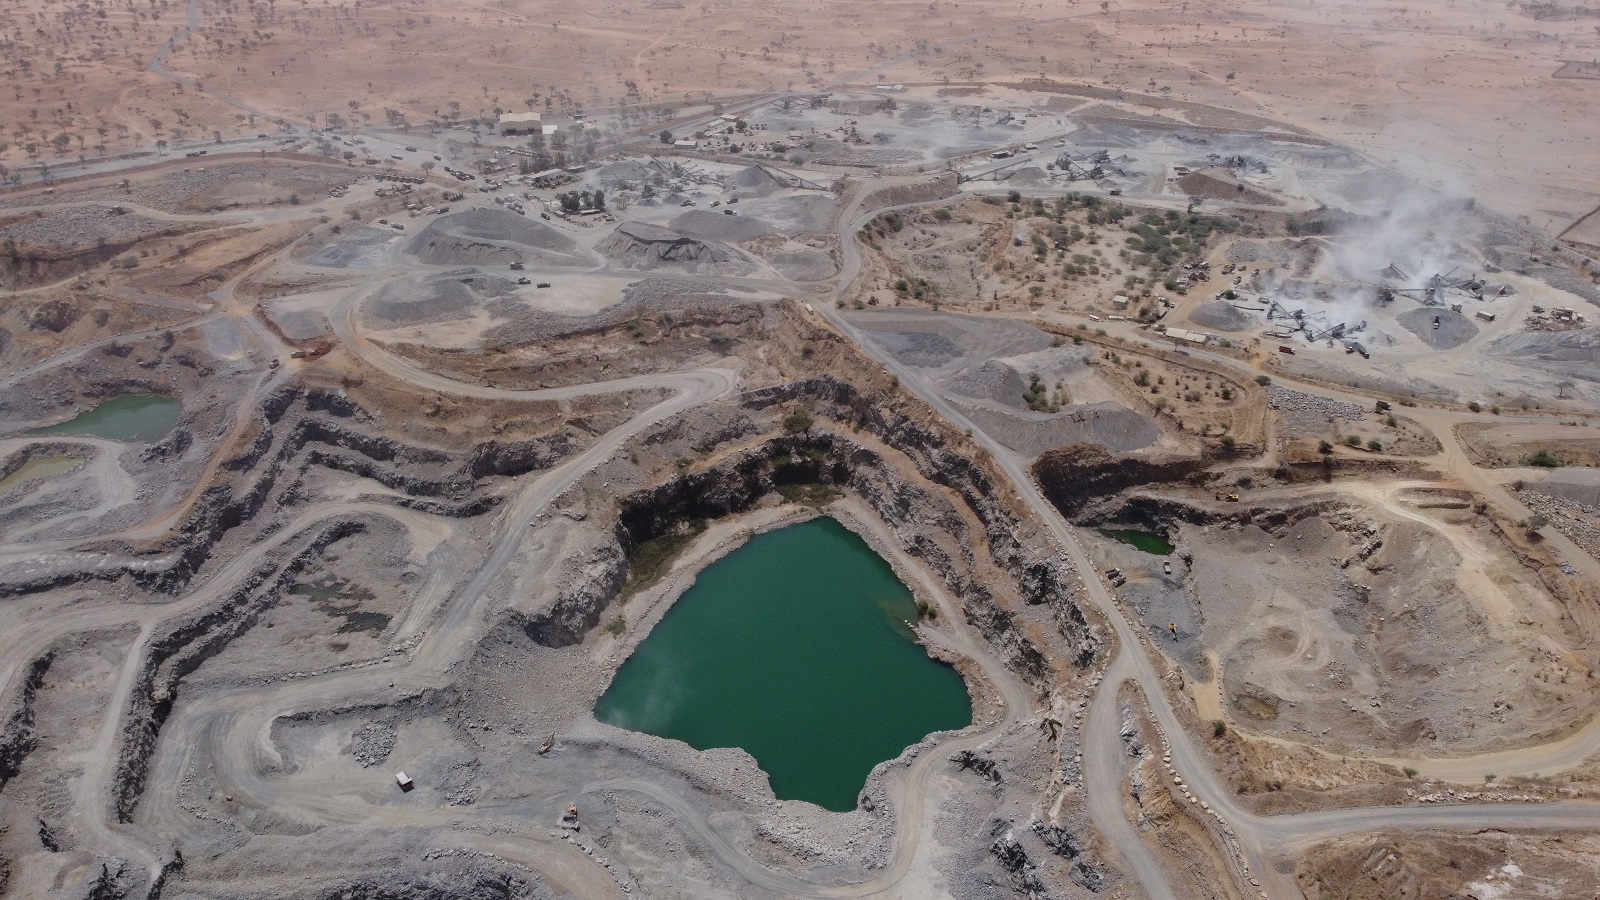 The Gécamines Quarries site produces three million tonnes of basalt rock and 500,000 tonnes of limestone a year